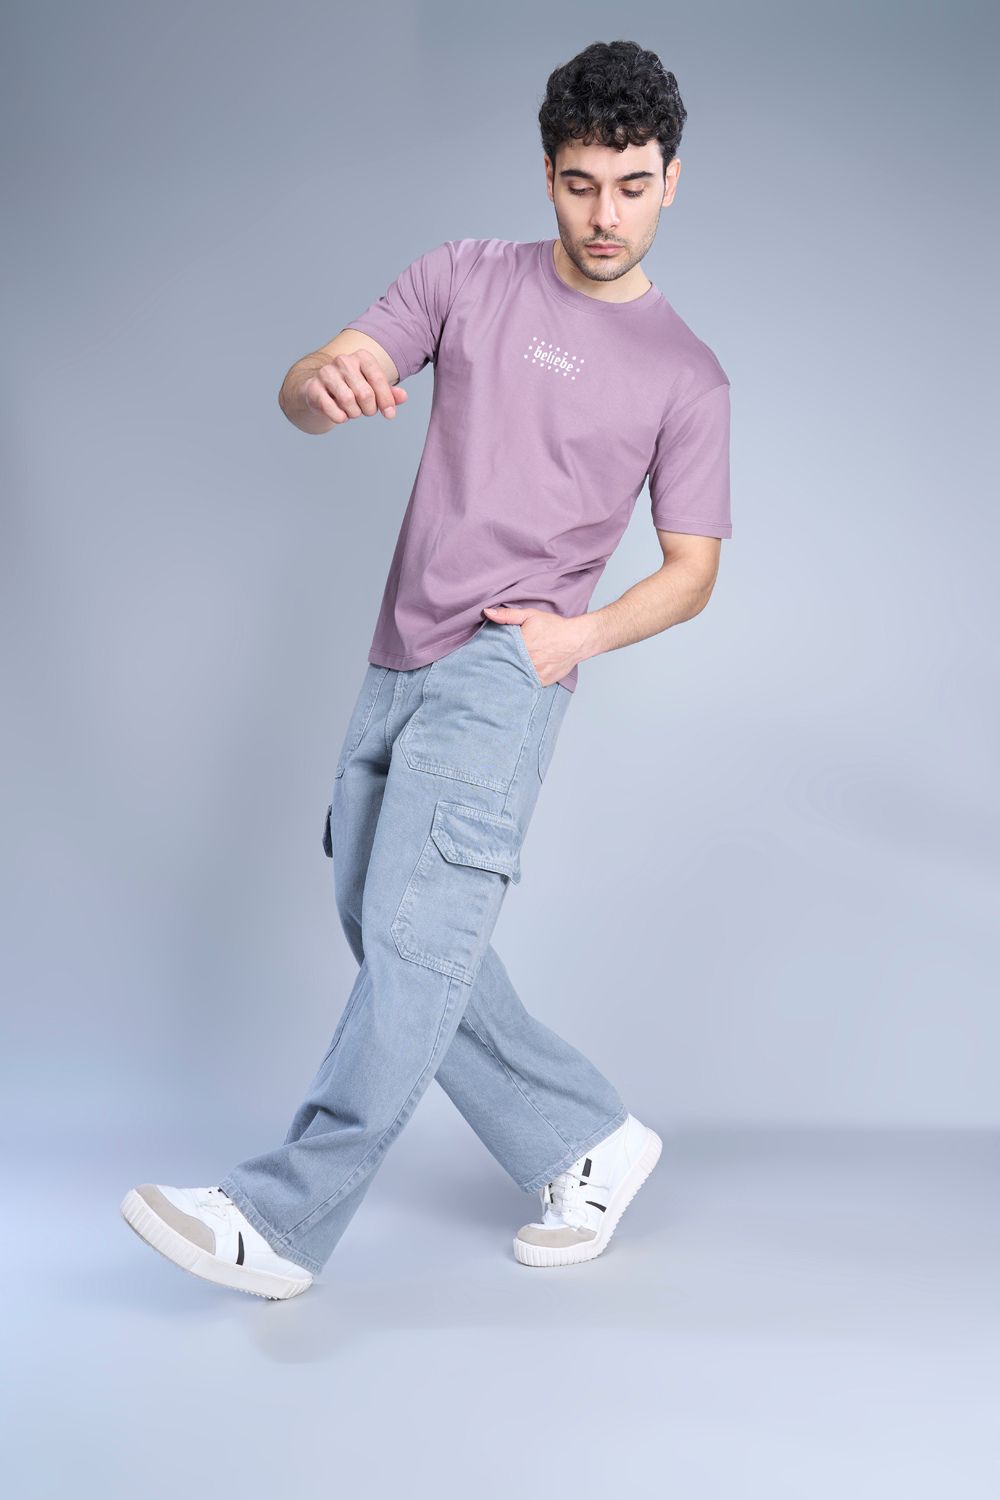 Cotton oversized T shirt for men in the solid color Opera Mauve with half sleeves and crew neck, side view.